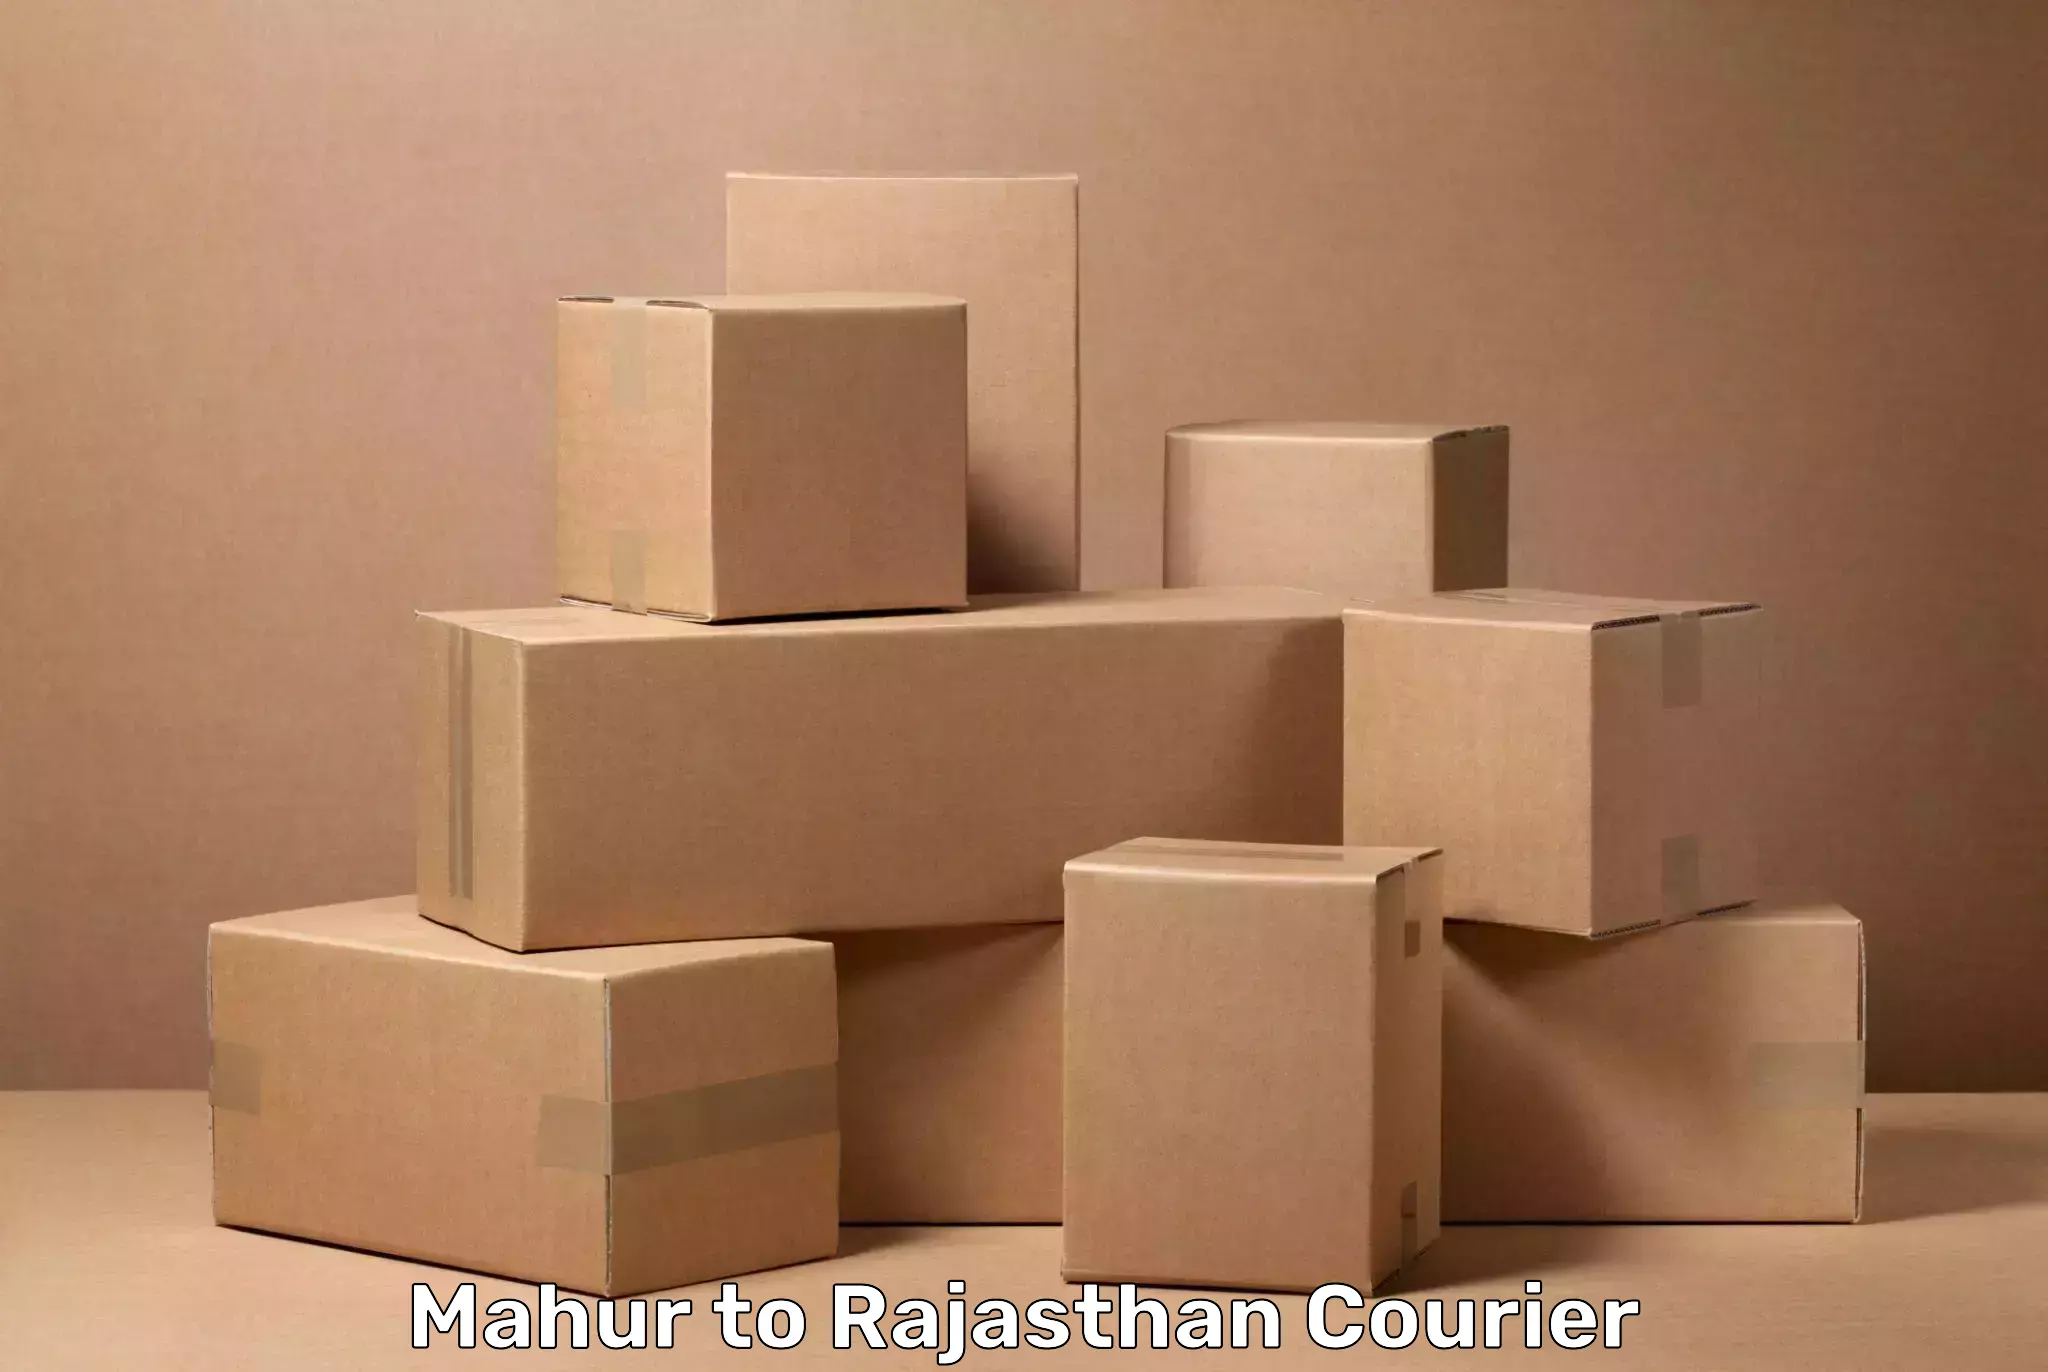 Baggage transport professionals Mahur to Yeswanthapur